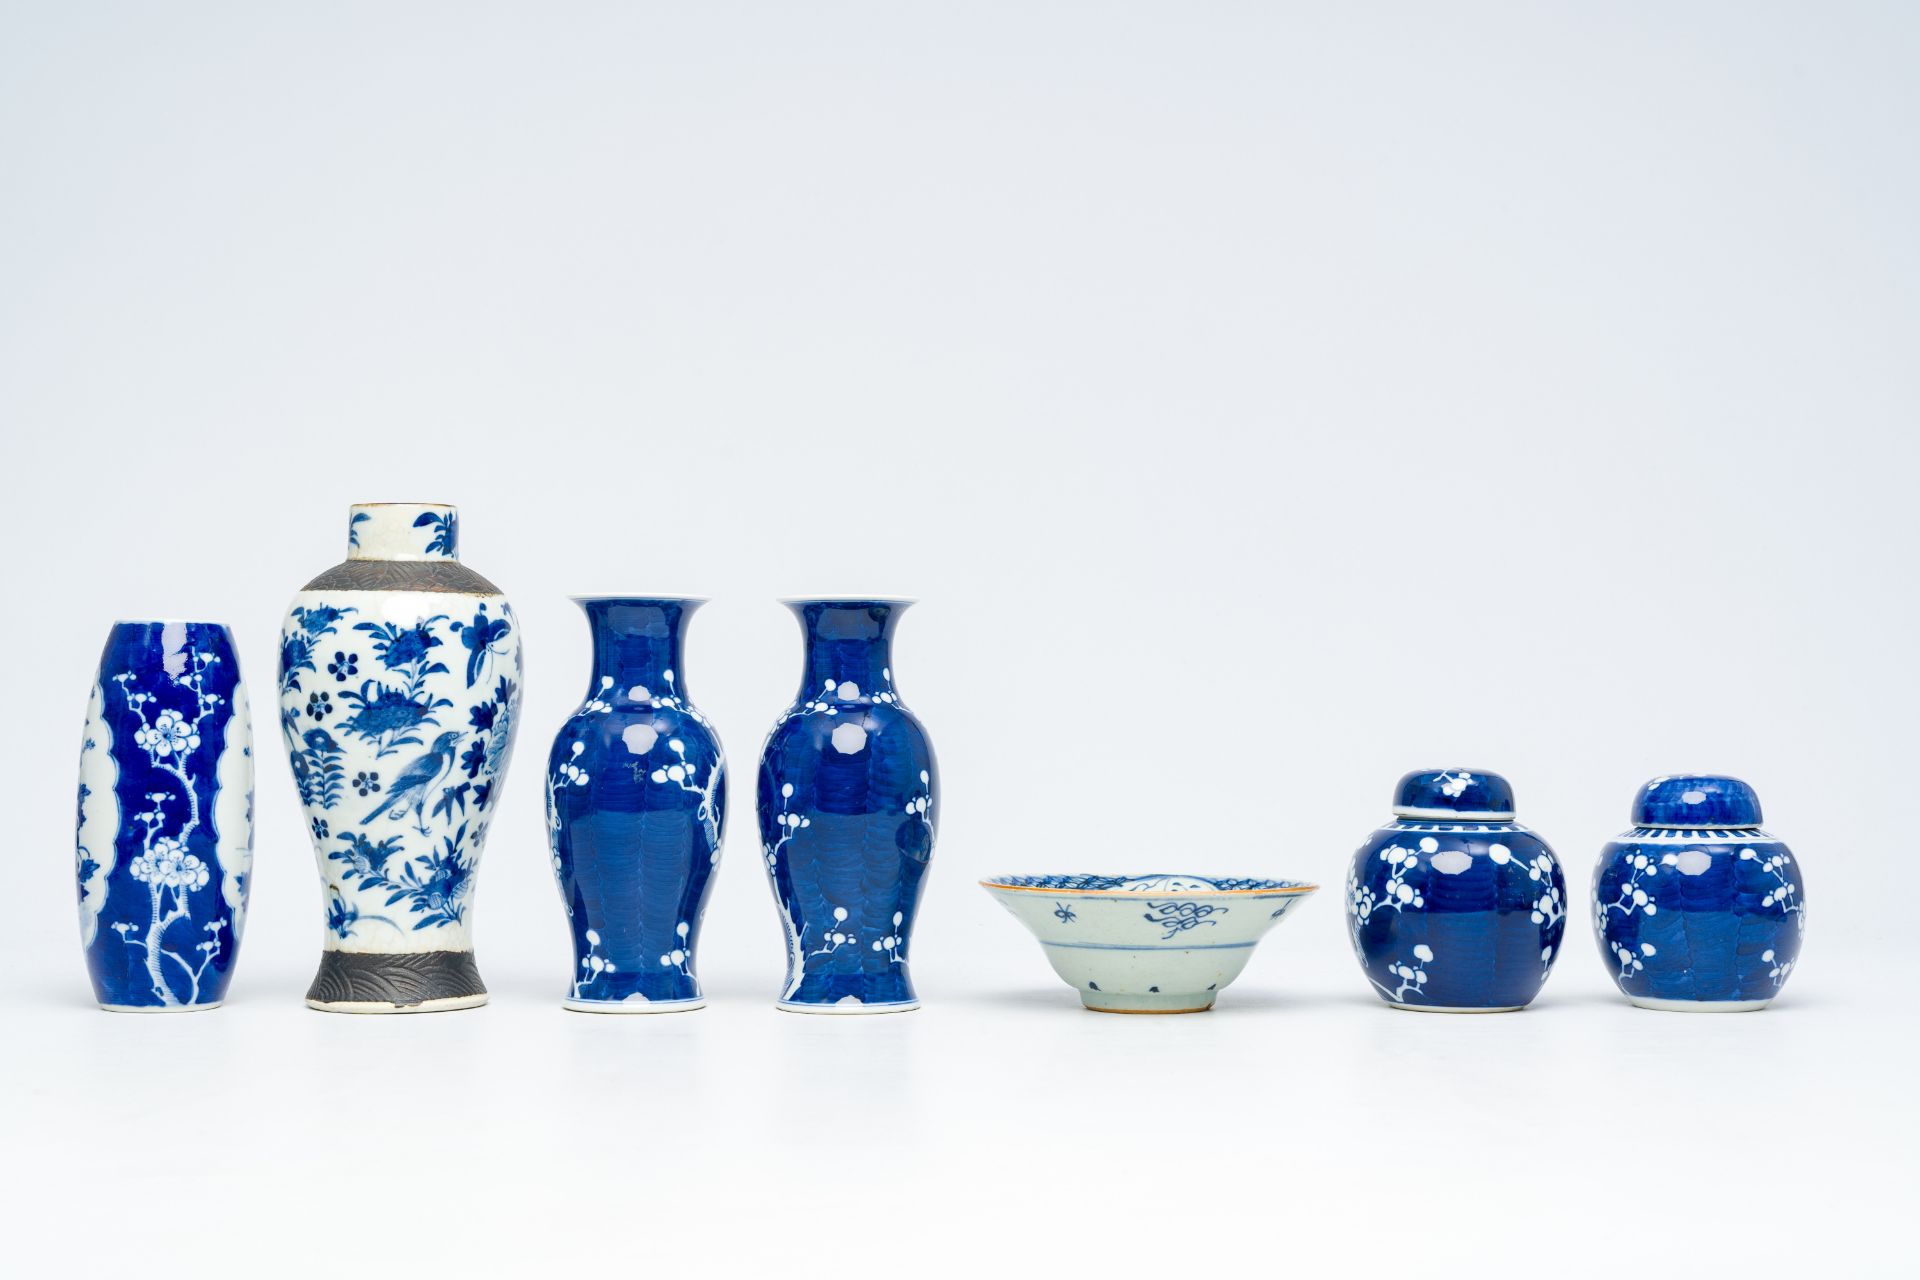 A varied collection of Chinese blue and white porcelain with floral design, 19th/20th C. - Image 9 of 18